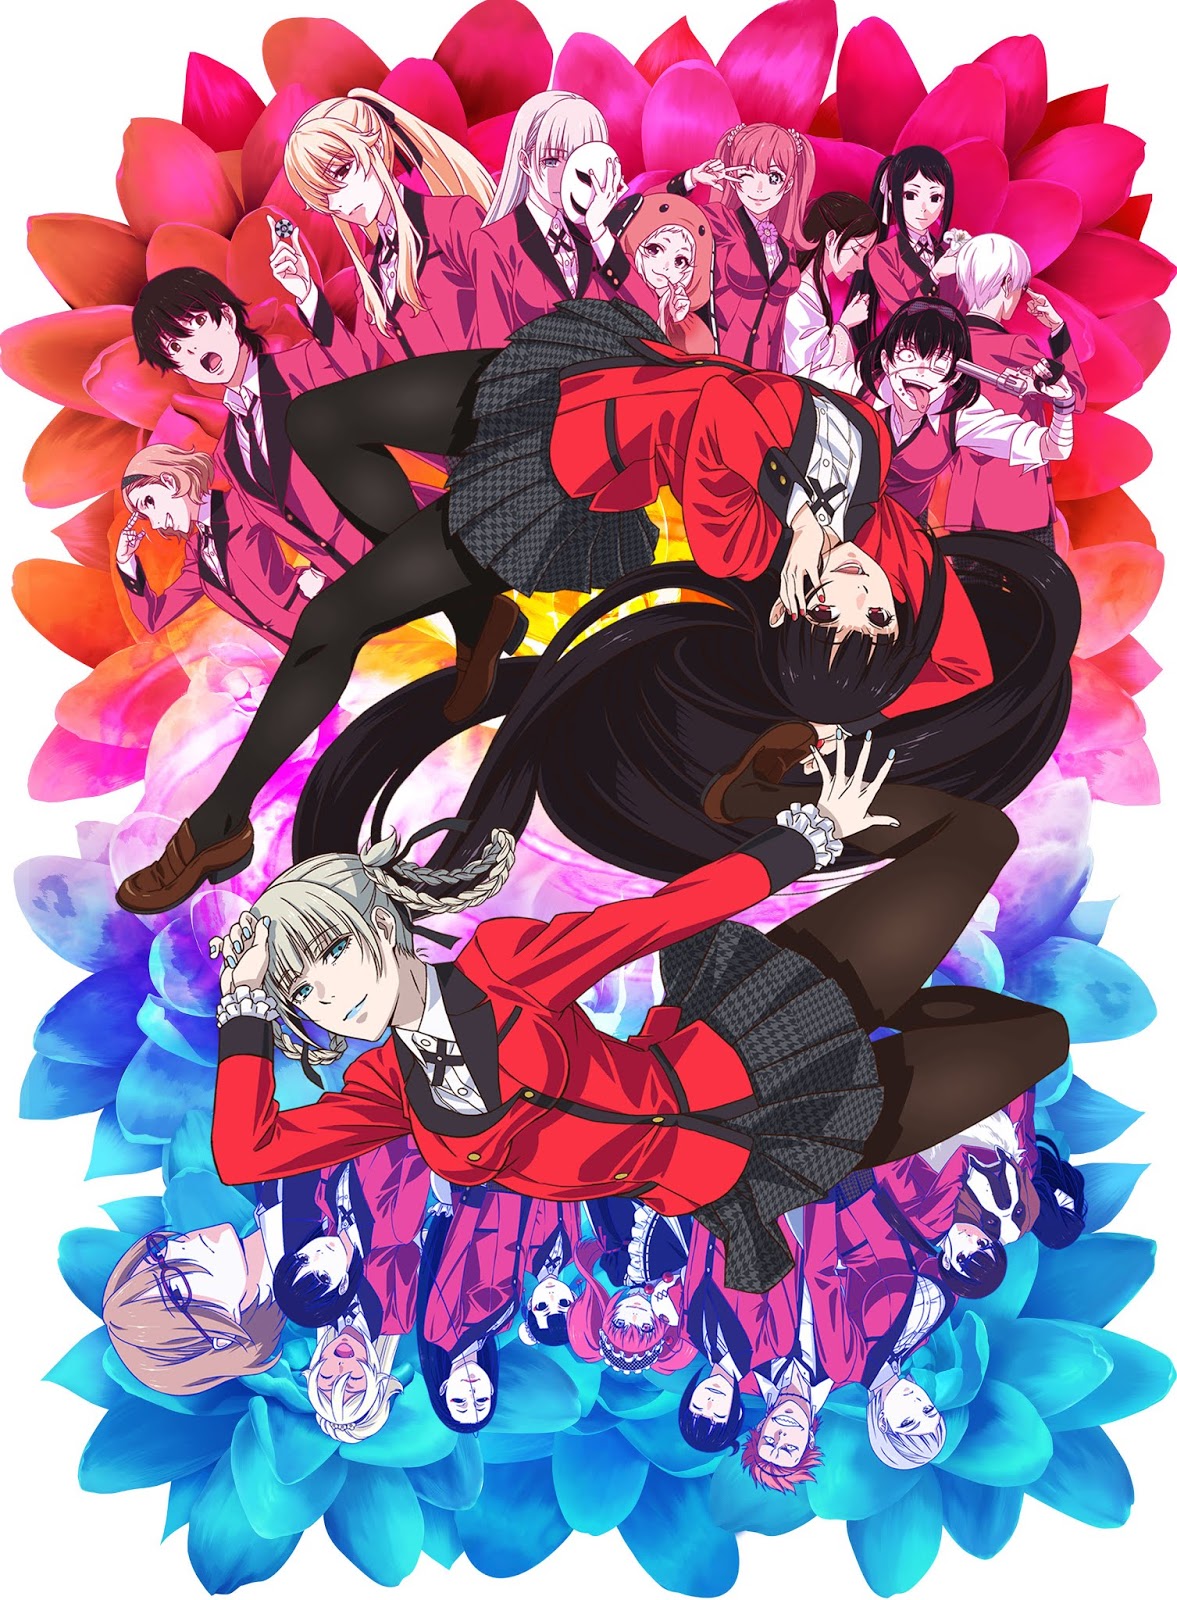 Kakegurui Twin review: A great psychological anime worth seeing